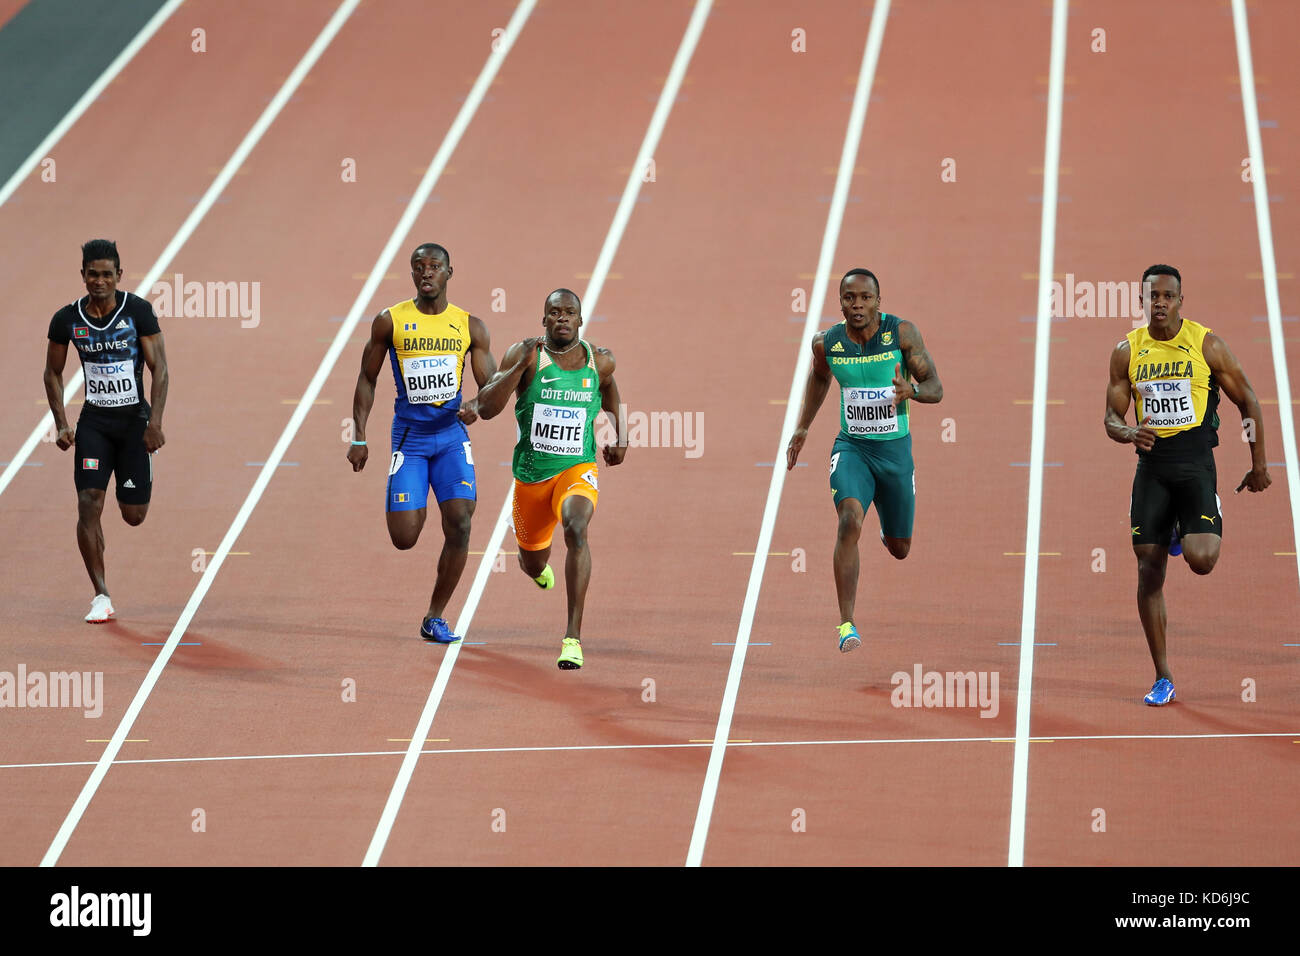 Julian FORTE (Jamaica), Akani SIMBINE (South Africa), Ben Youssef MEITÉ (Côte d'Ivoire, Ivory Coast), Mario BURKE (Barbados), Hassan SAAID (Maldives) competing in the Men's 100m Heat 3 at the 2017, IAAF World Championships, Queen Elizabeth Olympic Park, Stratford, London, UK. Stock Photo